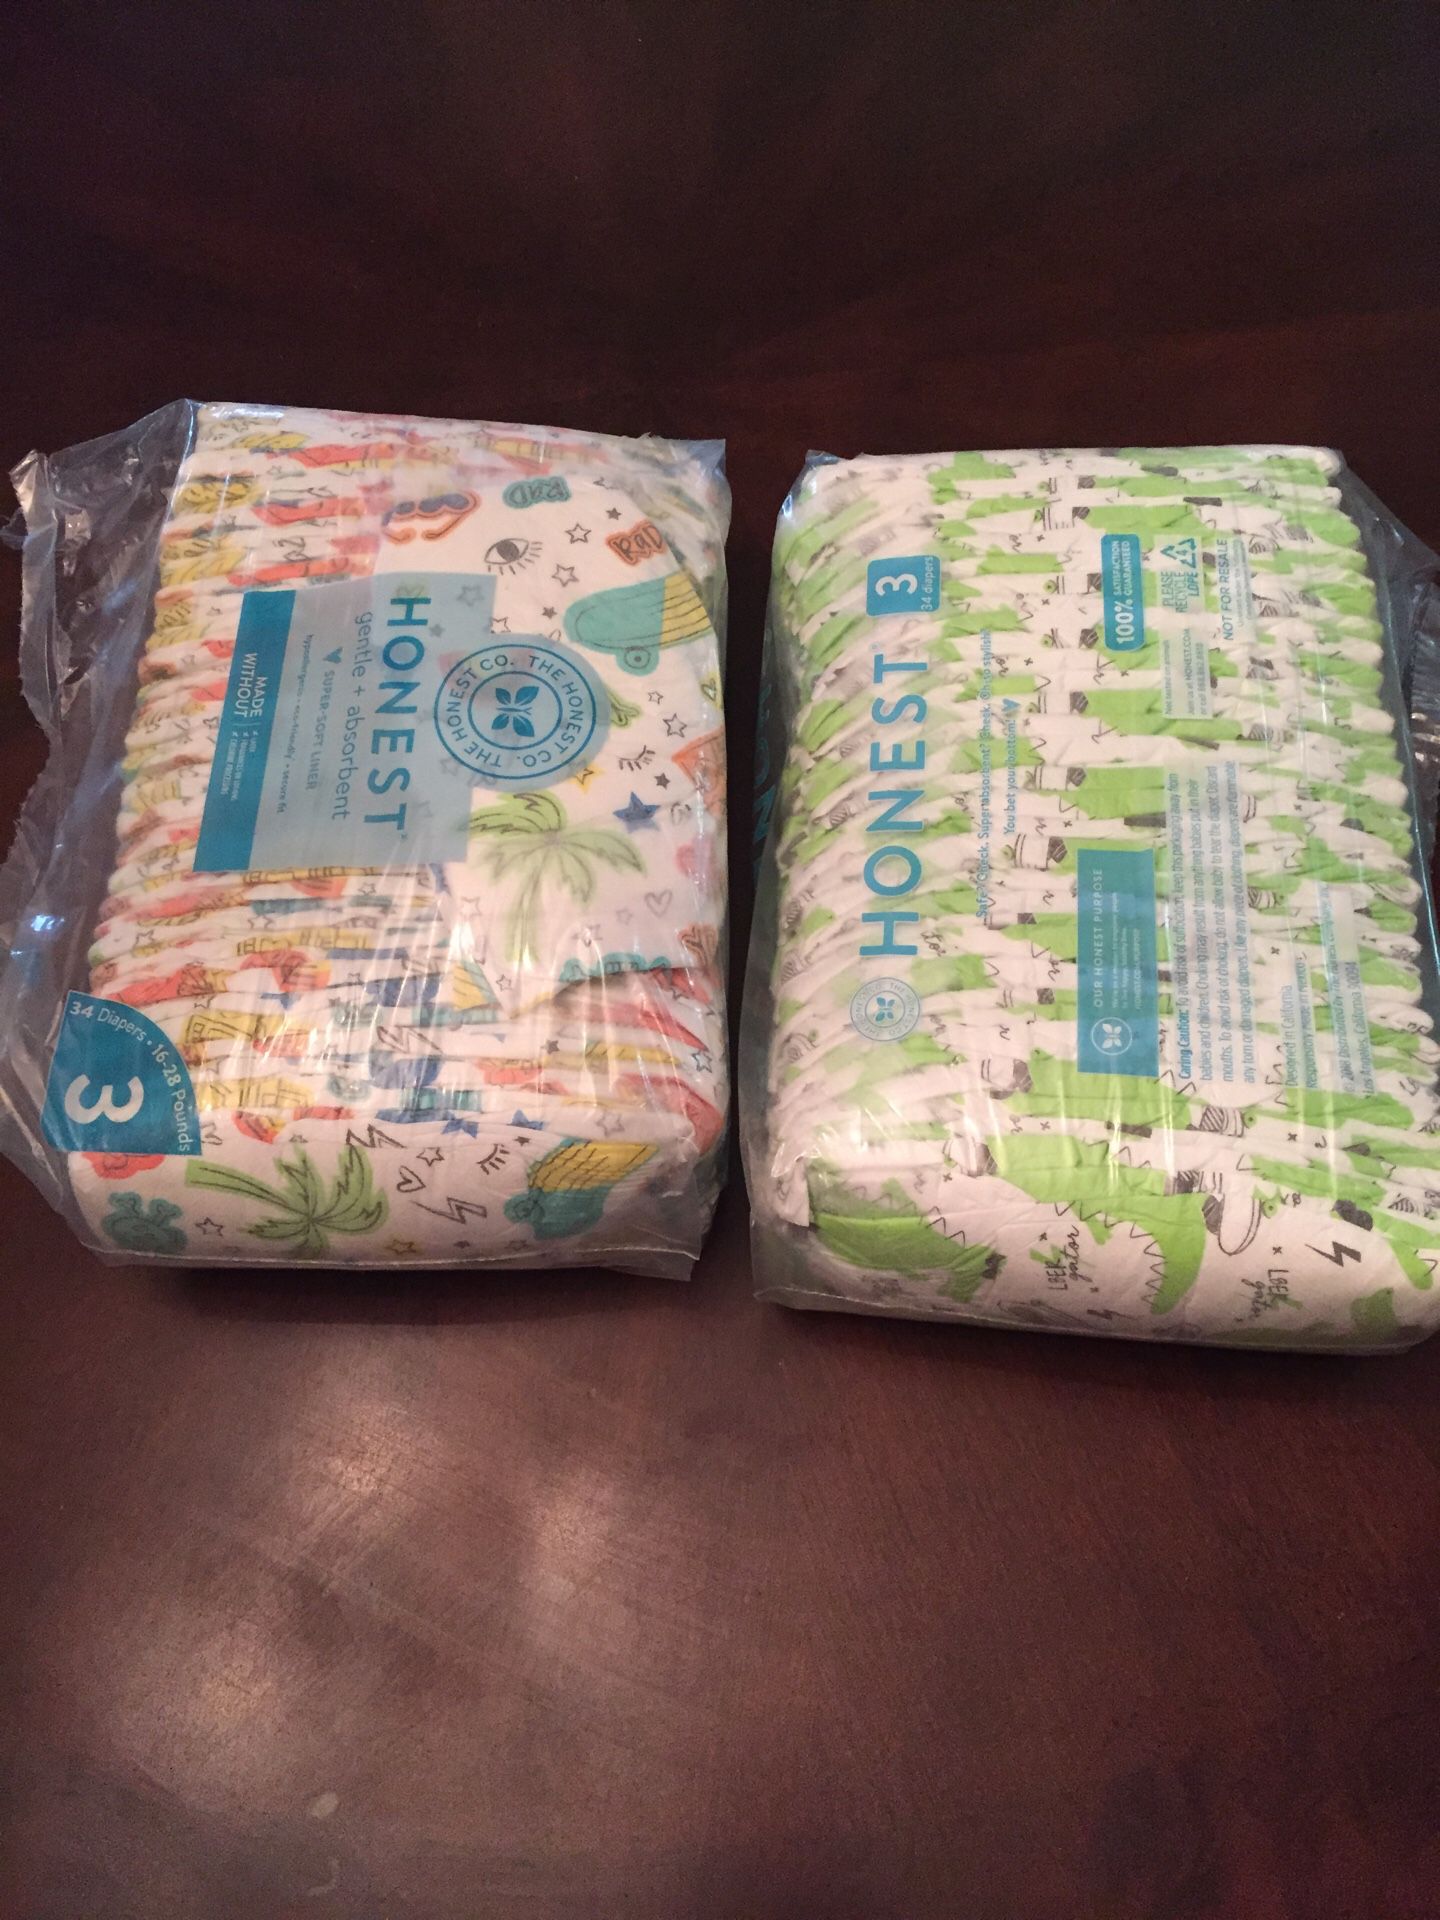 Size 3 diapers